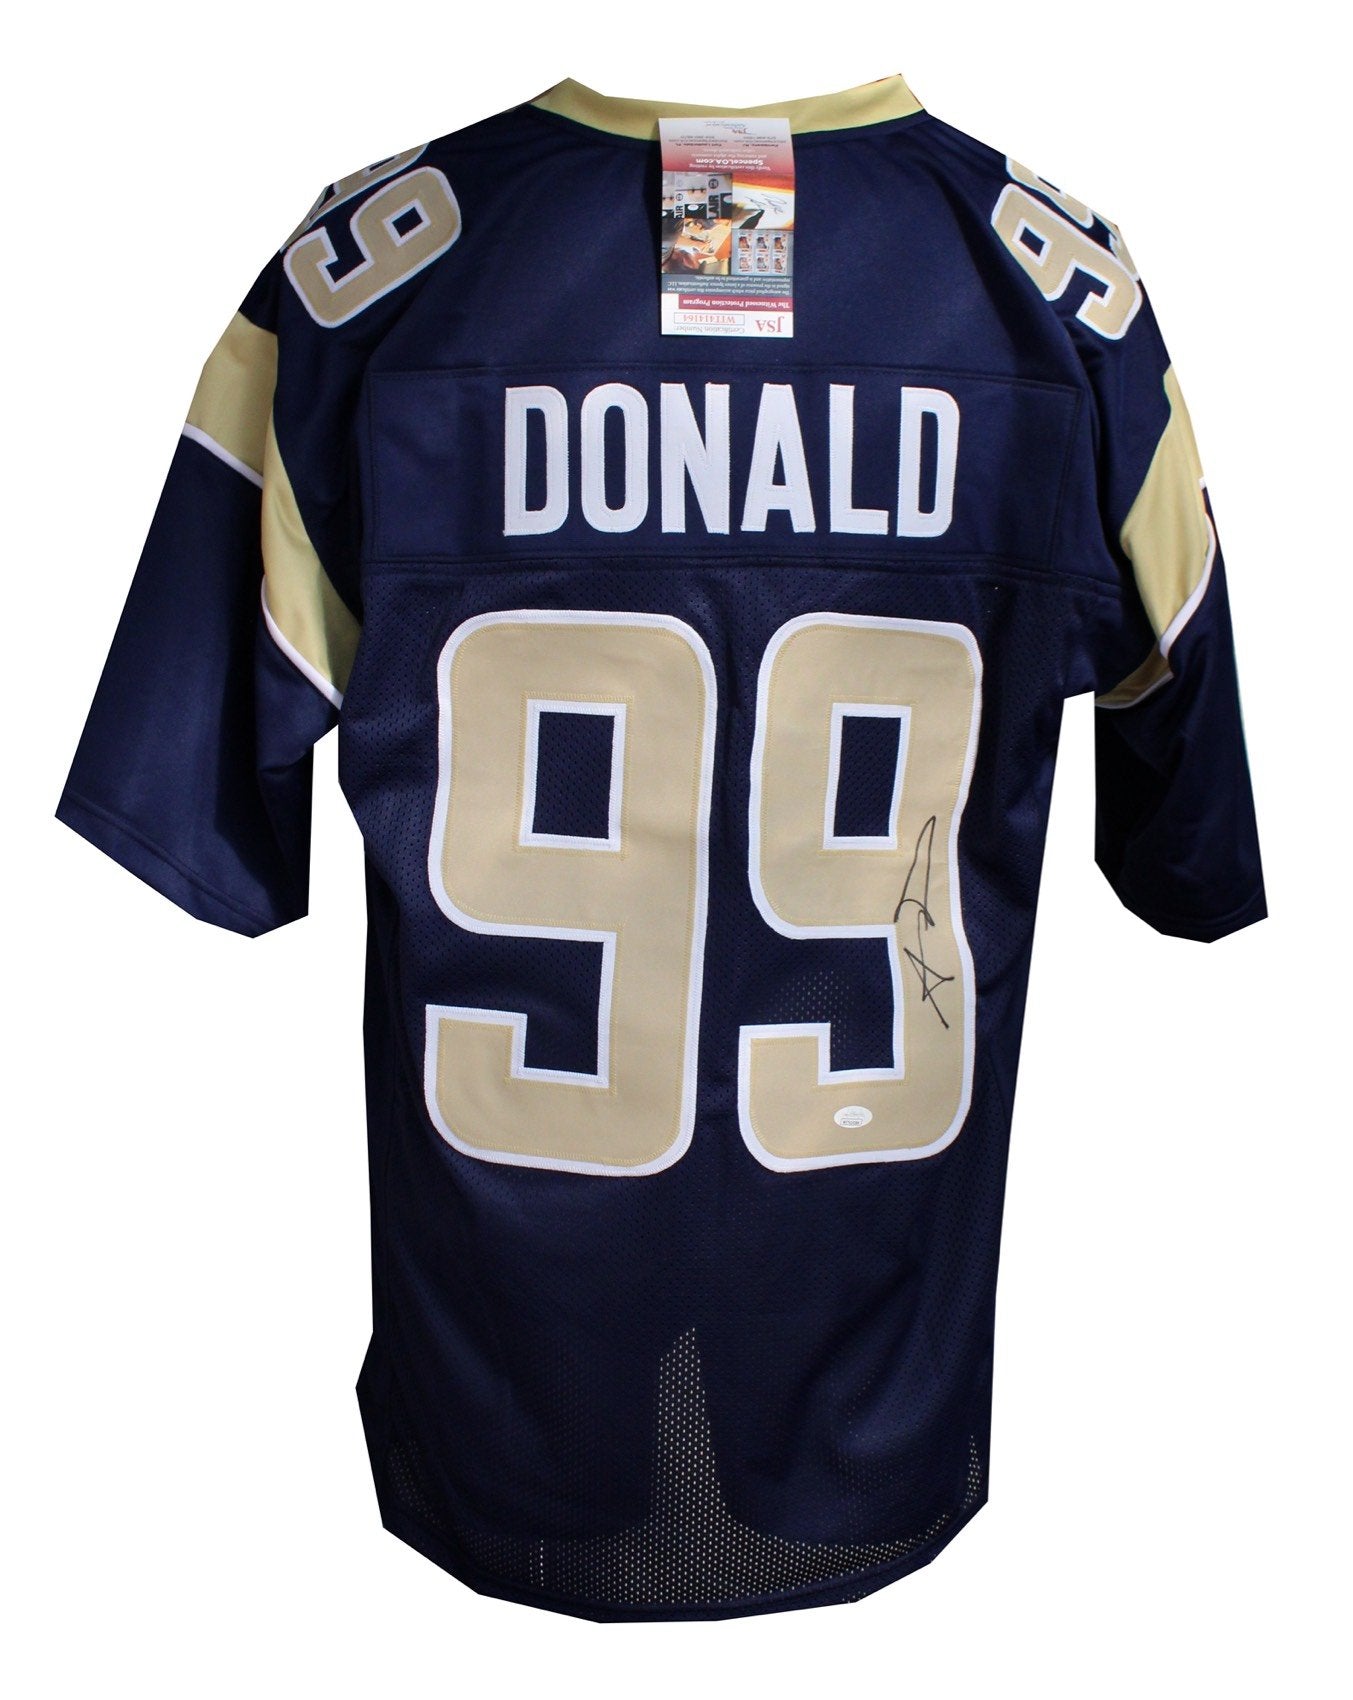 Aaron Donald 'Los Angeles Rams' Autographed Blue/Gold Custom